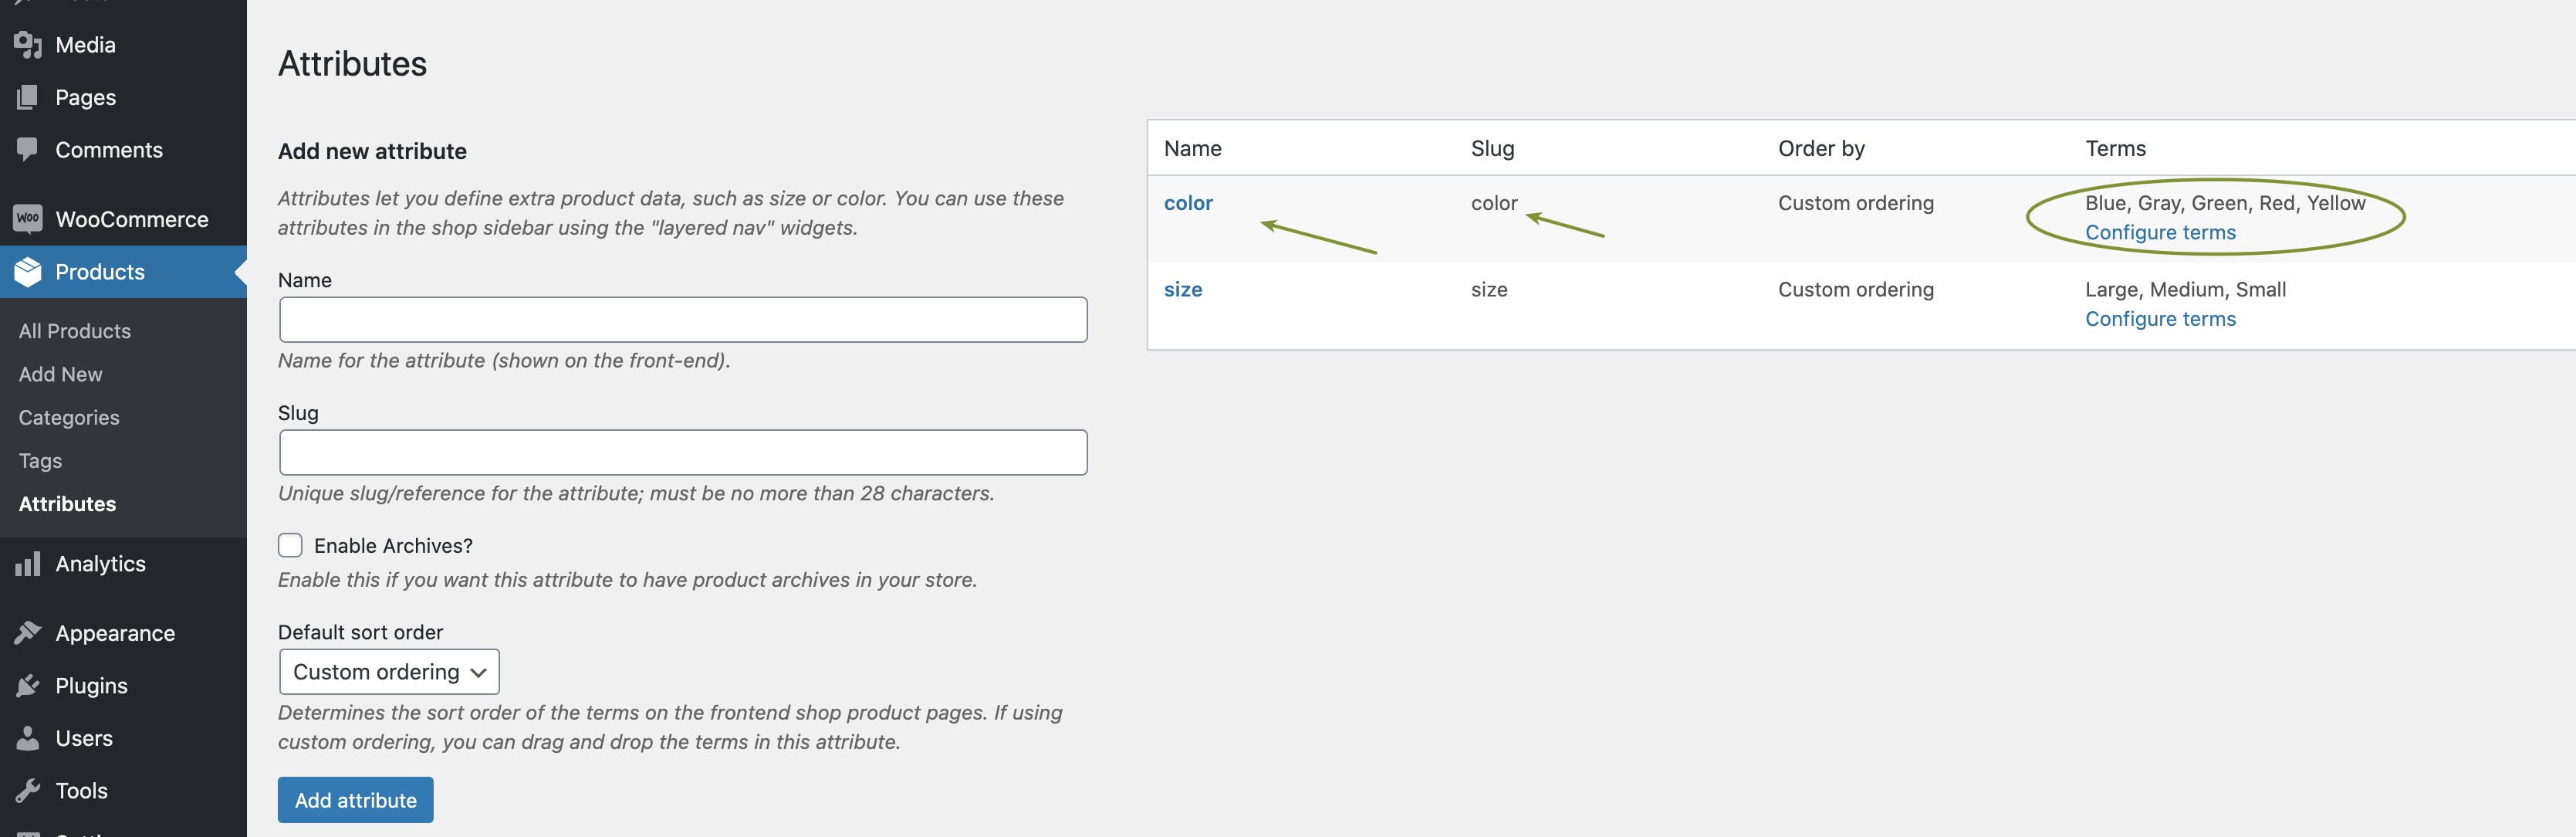 Create WooCommerce Attributes and Terms